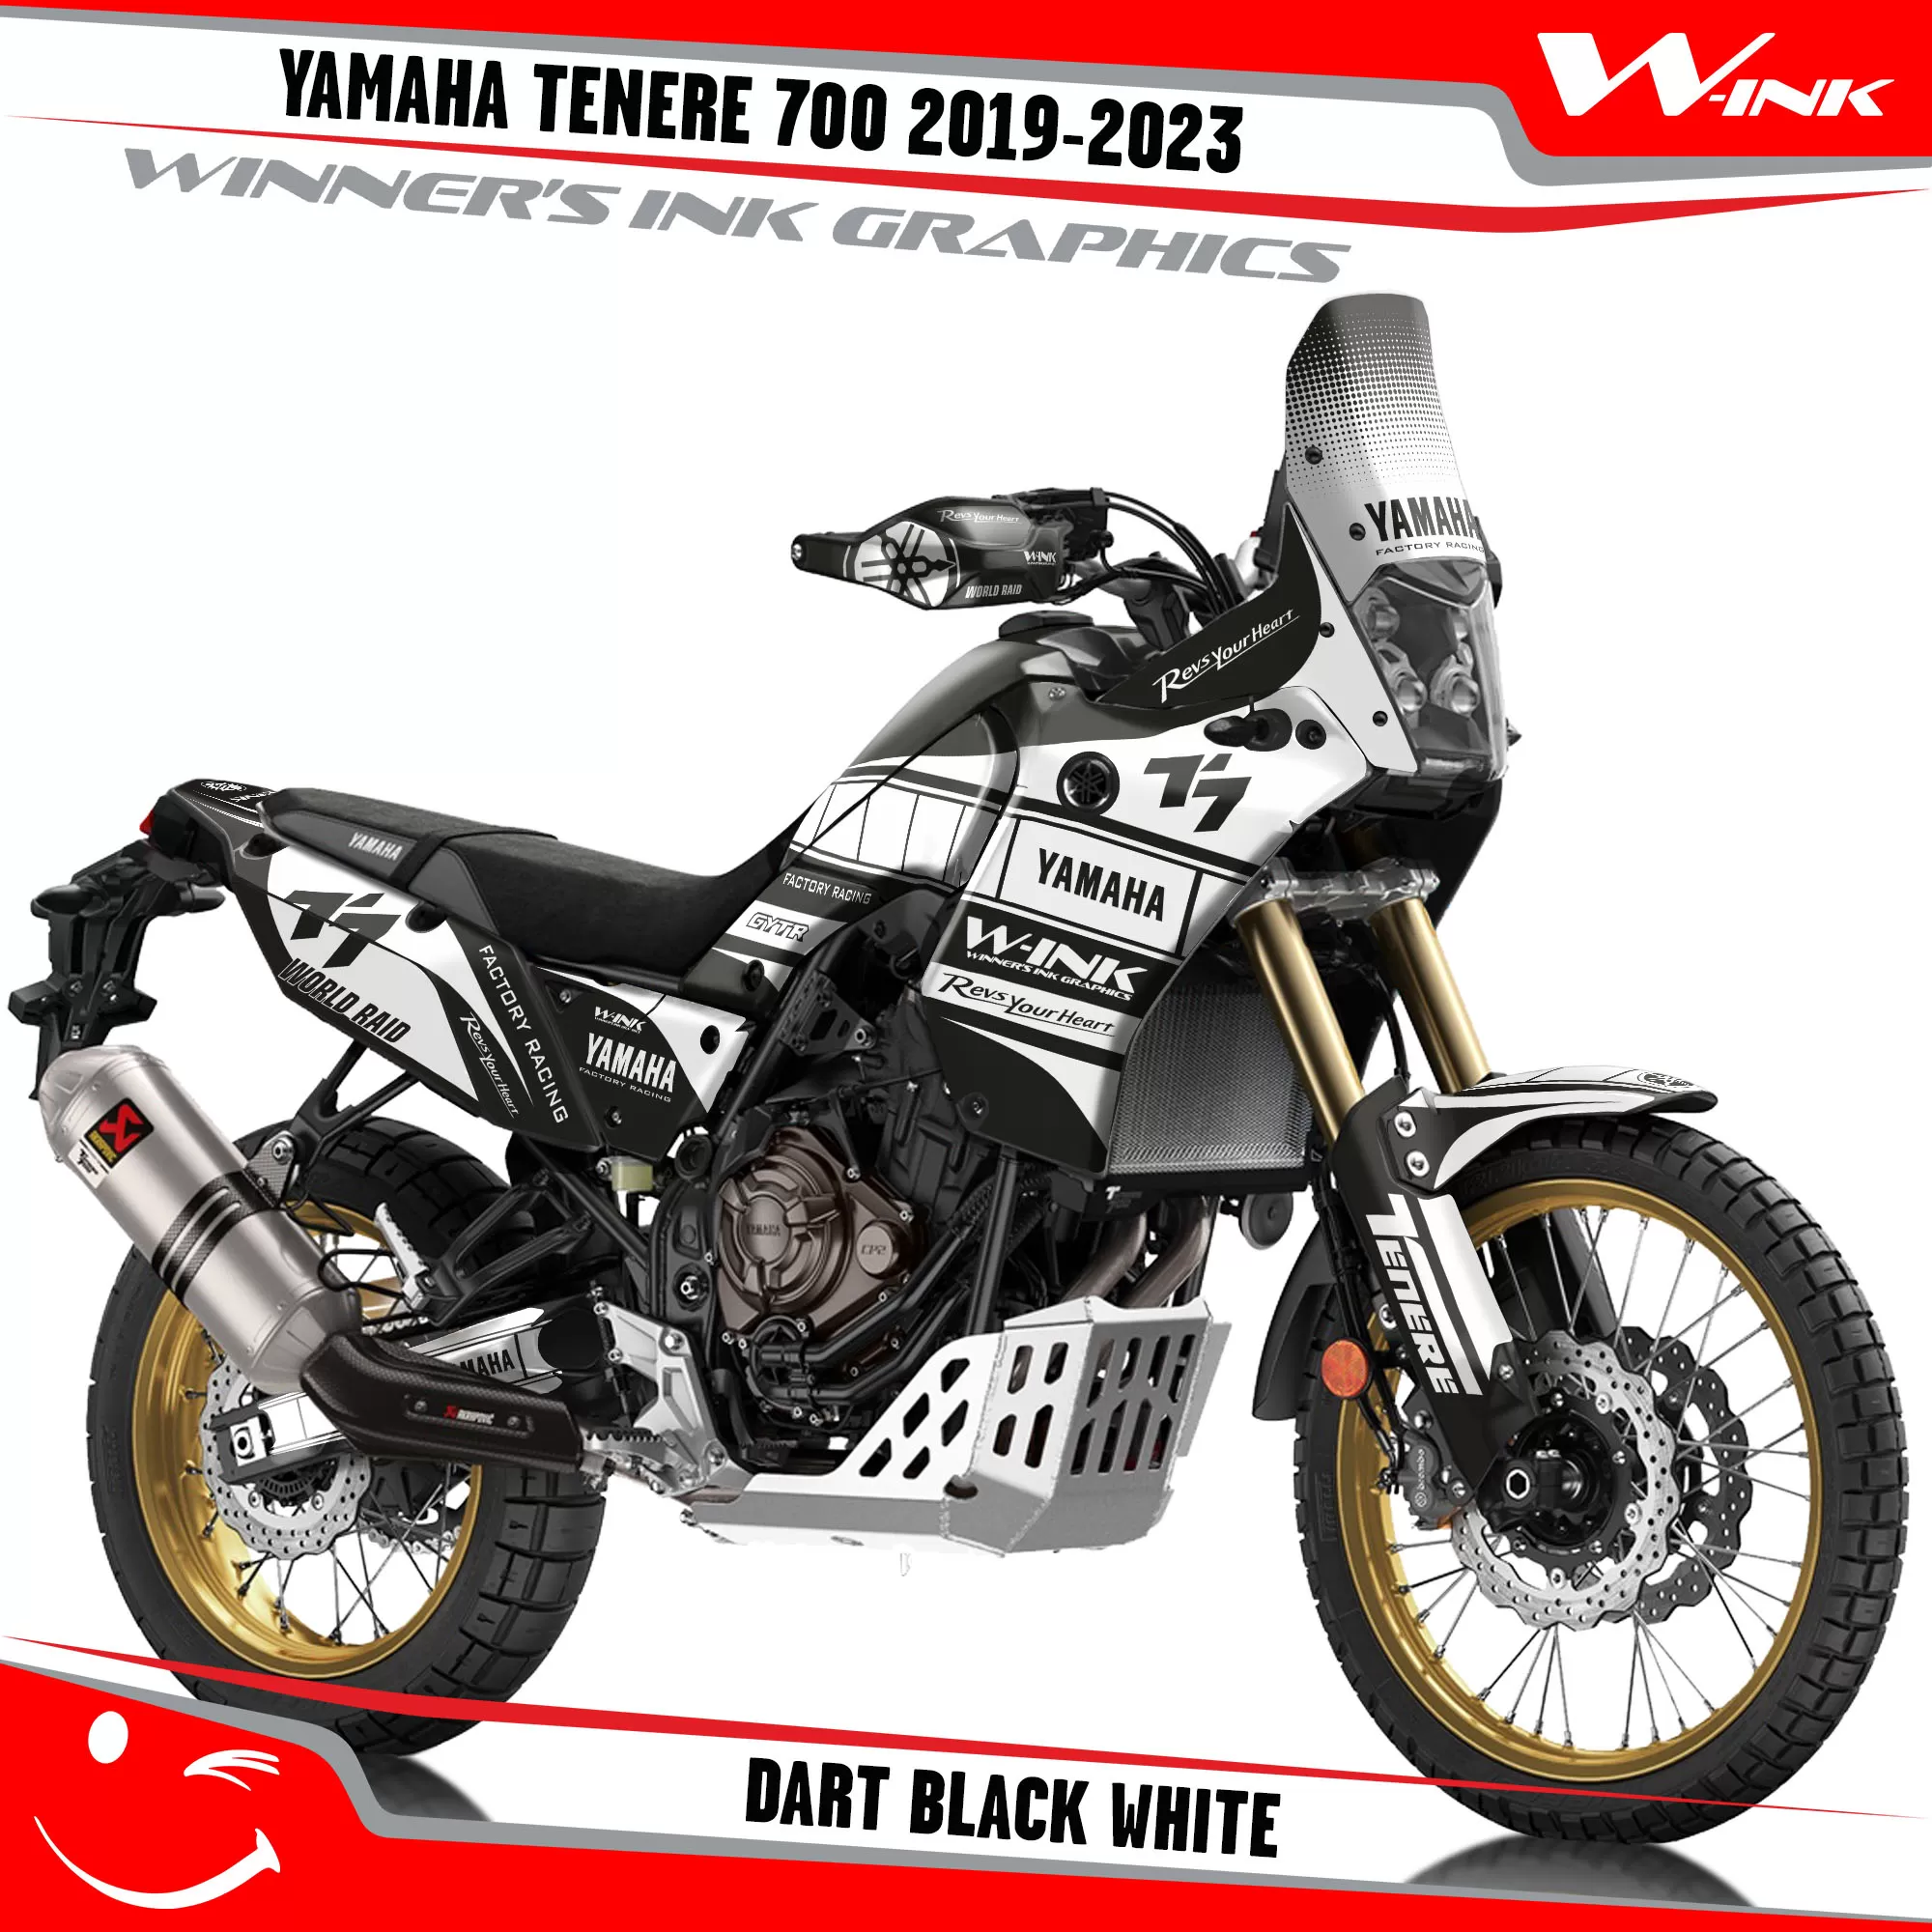 Yamaha-Tenere-700-2019-2020-2021-2022-2023-graphics-kit-and-decals-with-desing-Dart-Full-Black-White